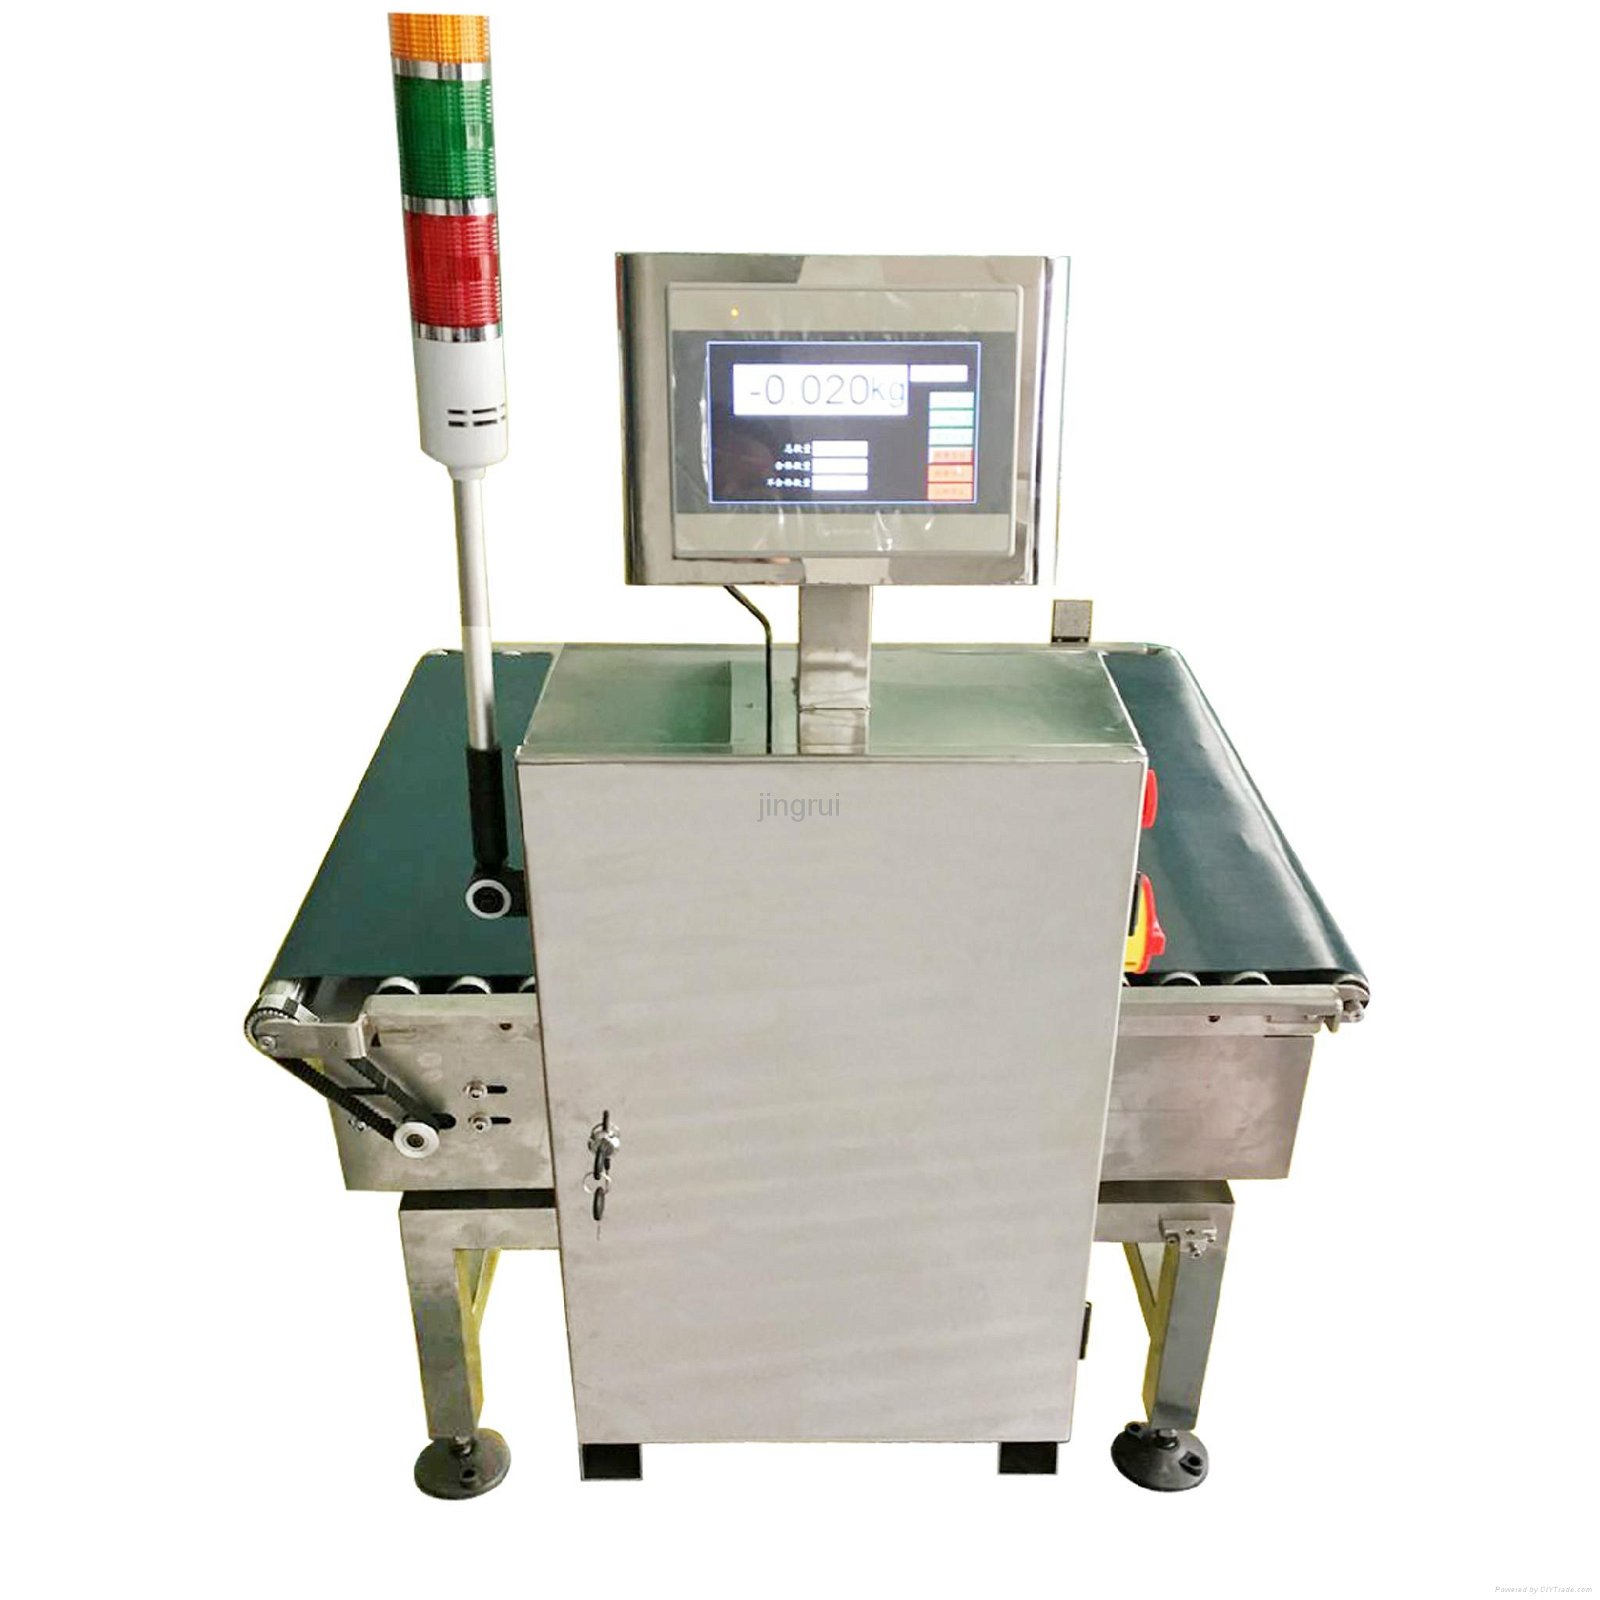 Automatic high accuracy weighing instrument checkweigher JLCW-5 5